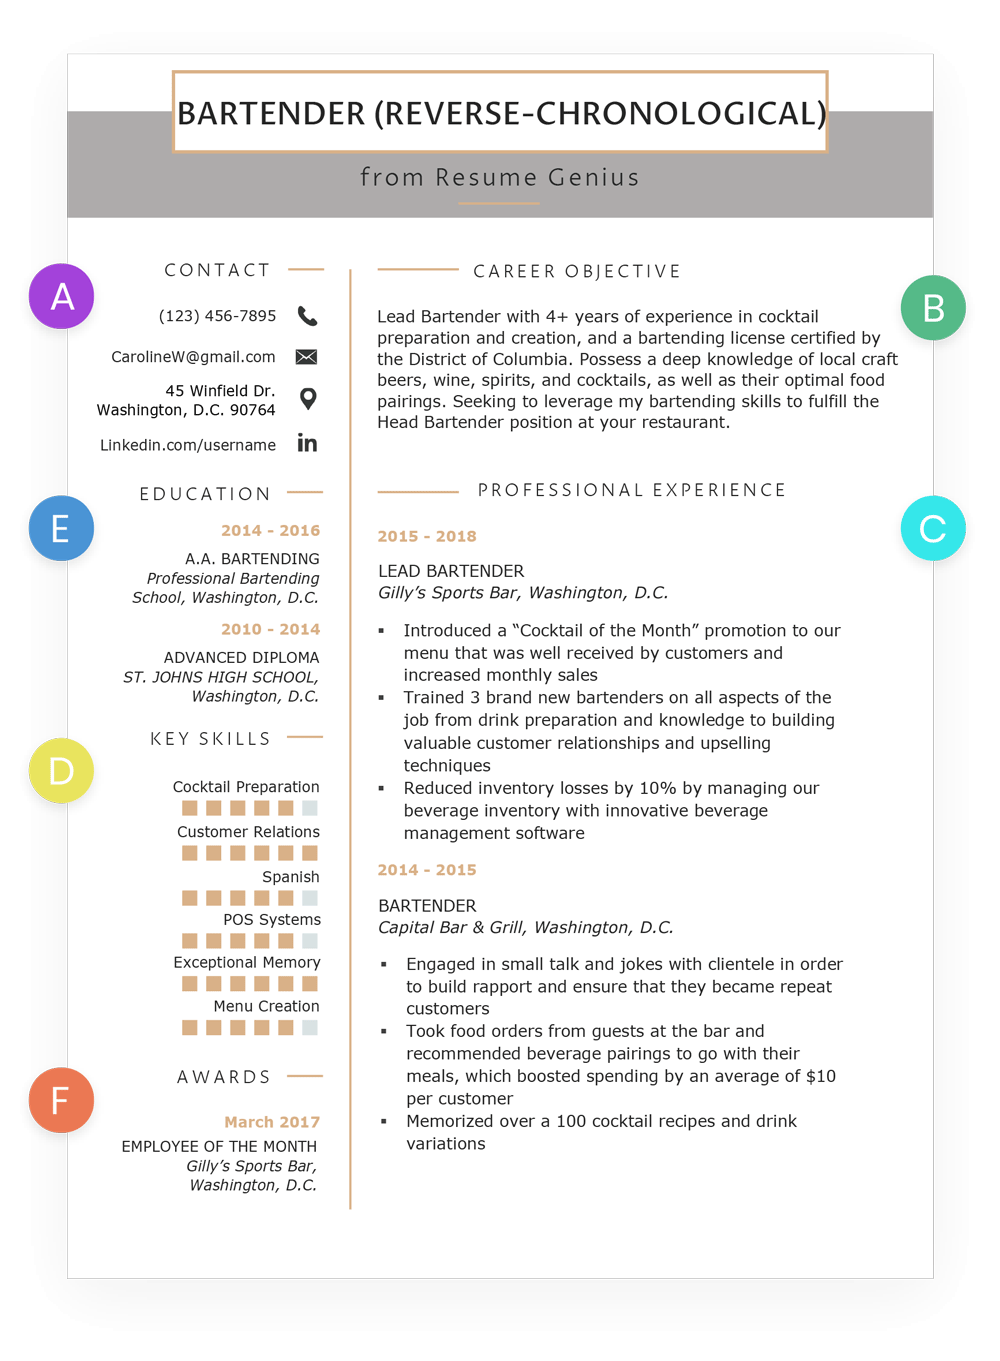 A labeled example of a how a resume differs from a cover letter